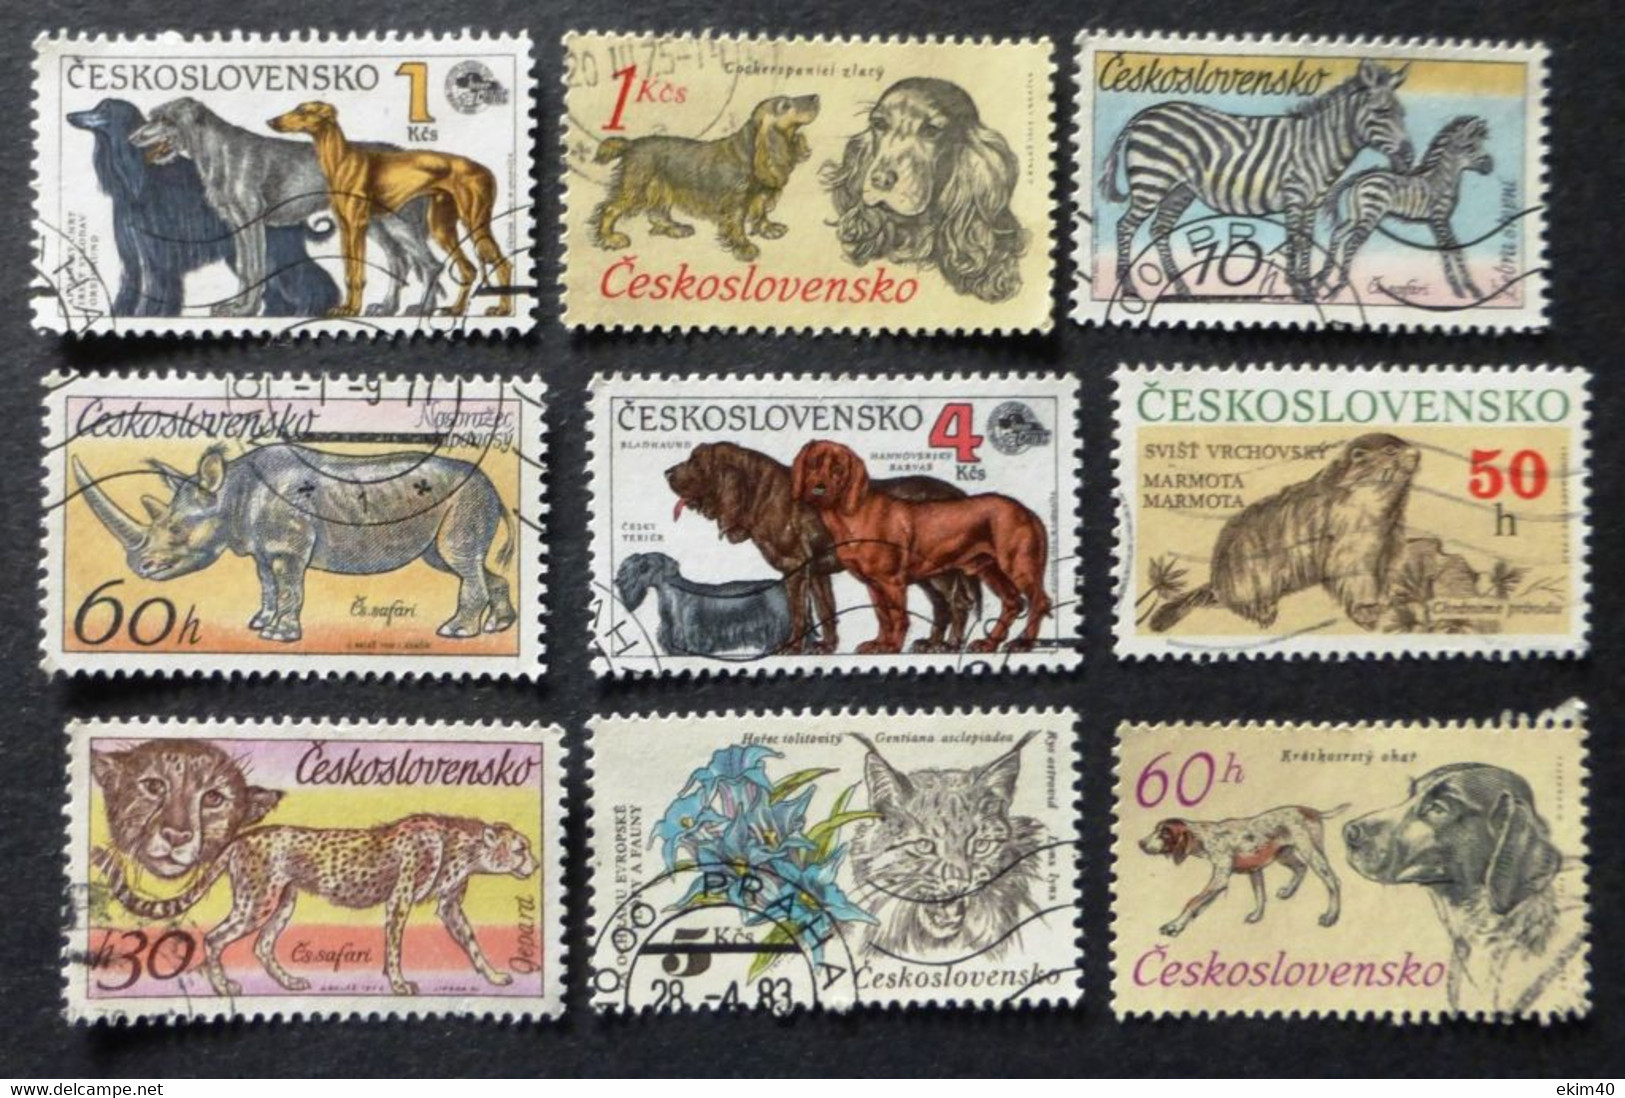 Selection Of Used/Cancelled Stamps From Czechoslovakia Wild & Domestic Animals. No DC-320 - Oblitérés